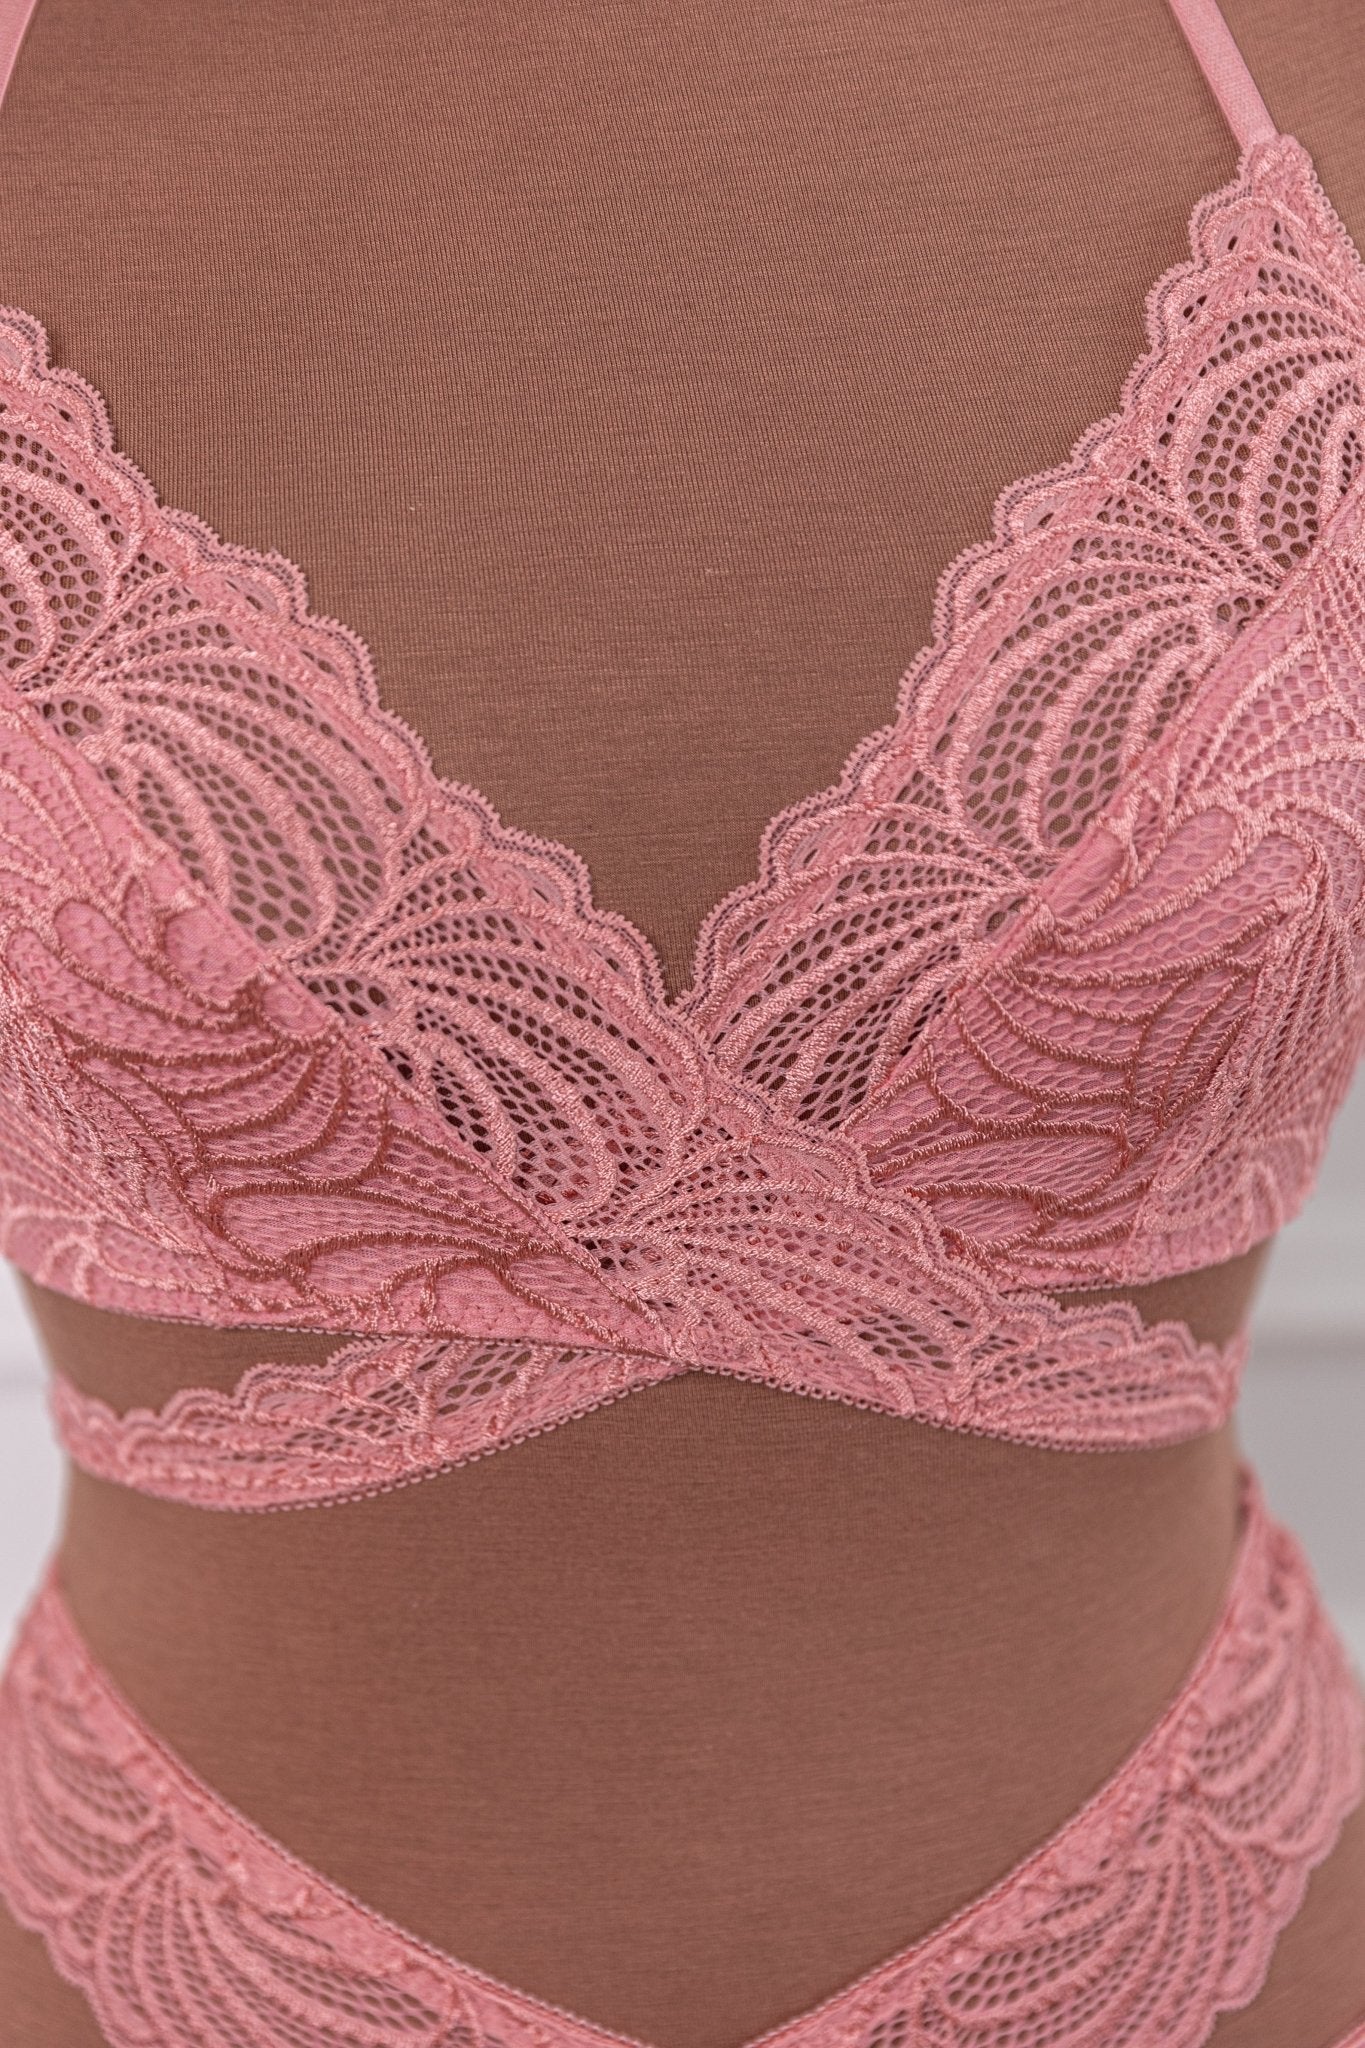 Strappy Wrap Bralette - Dusty Rose - Mentionables